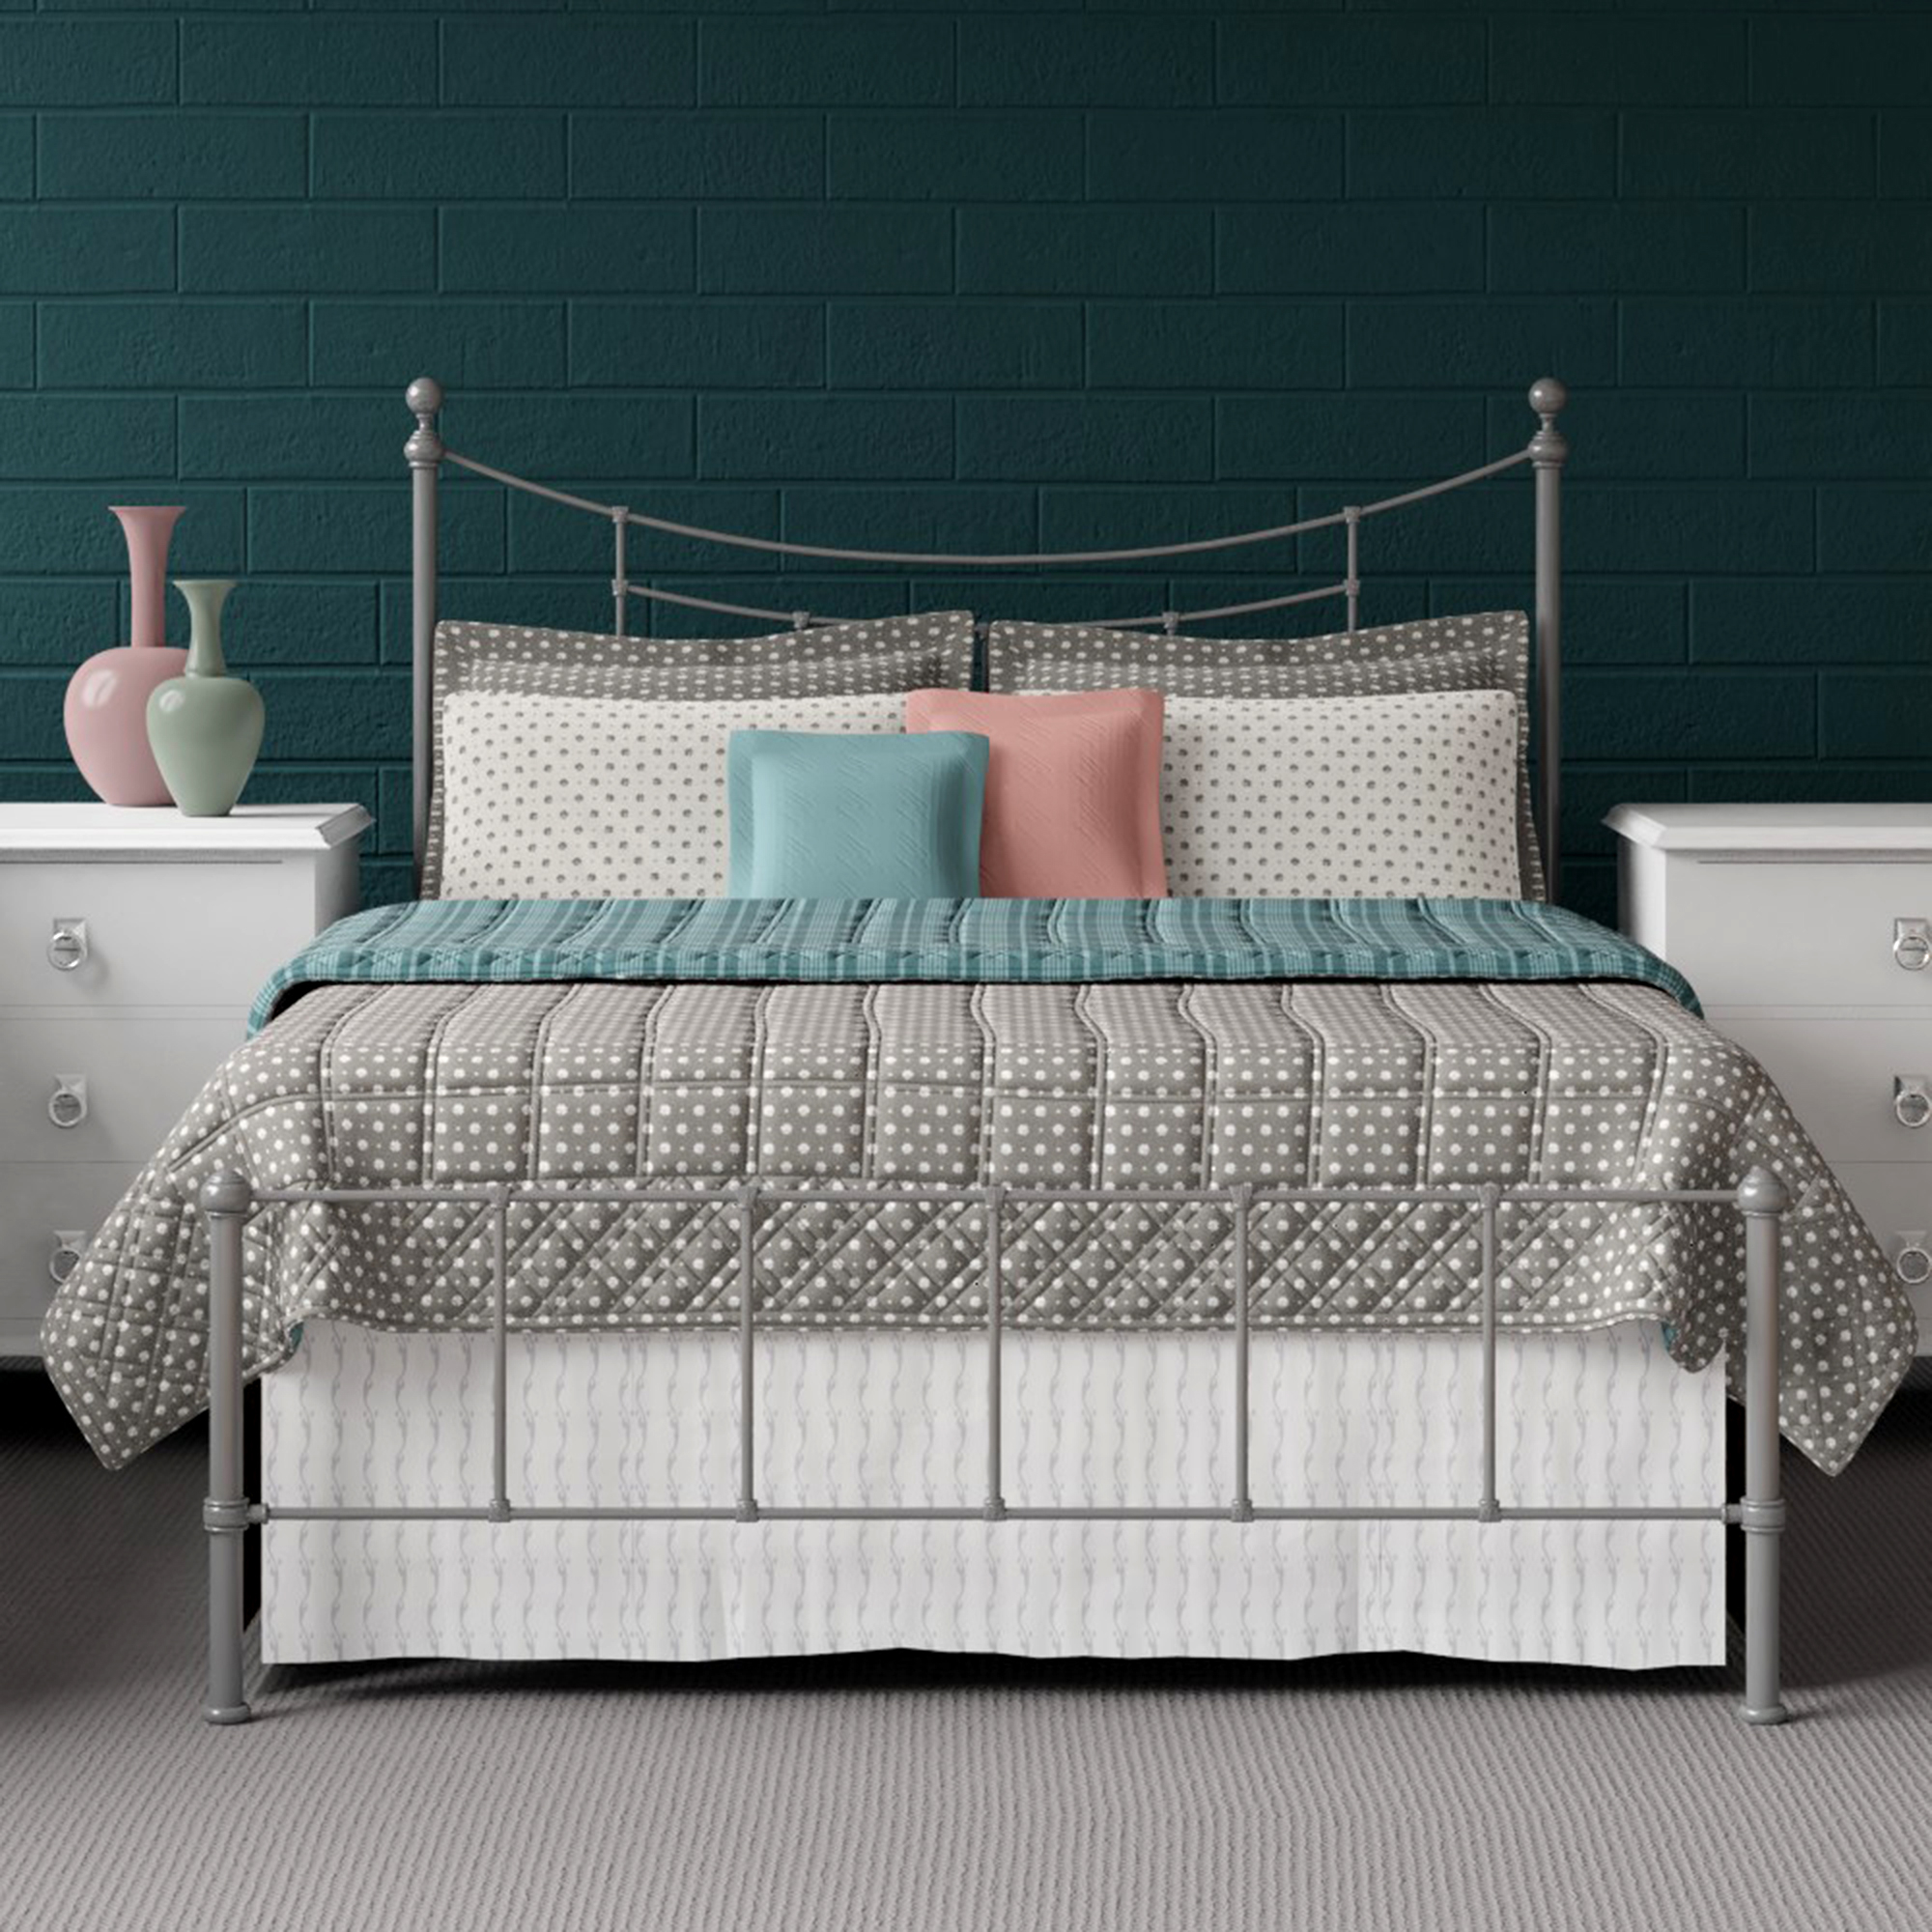 Isabelle iron bed - Teal and grey